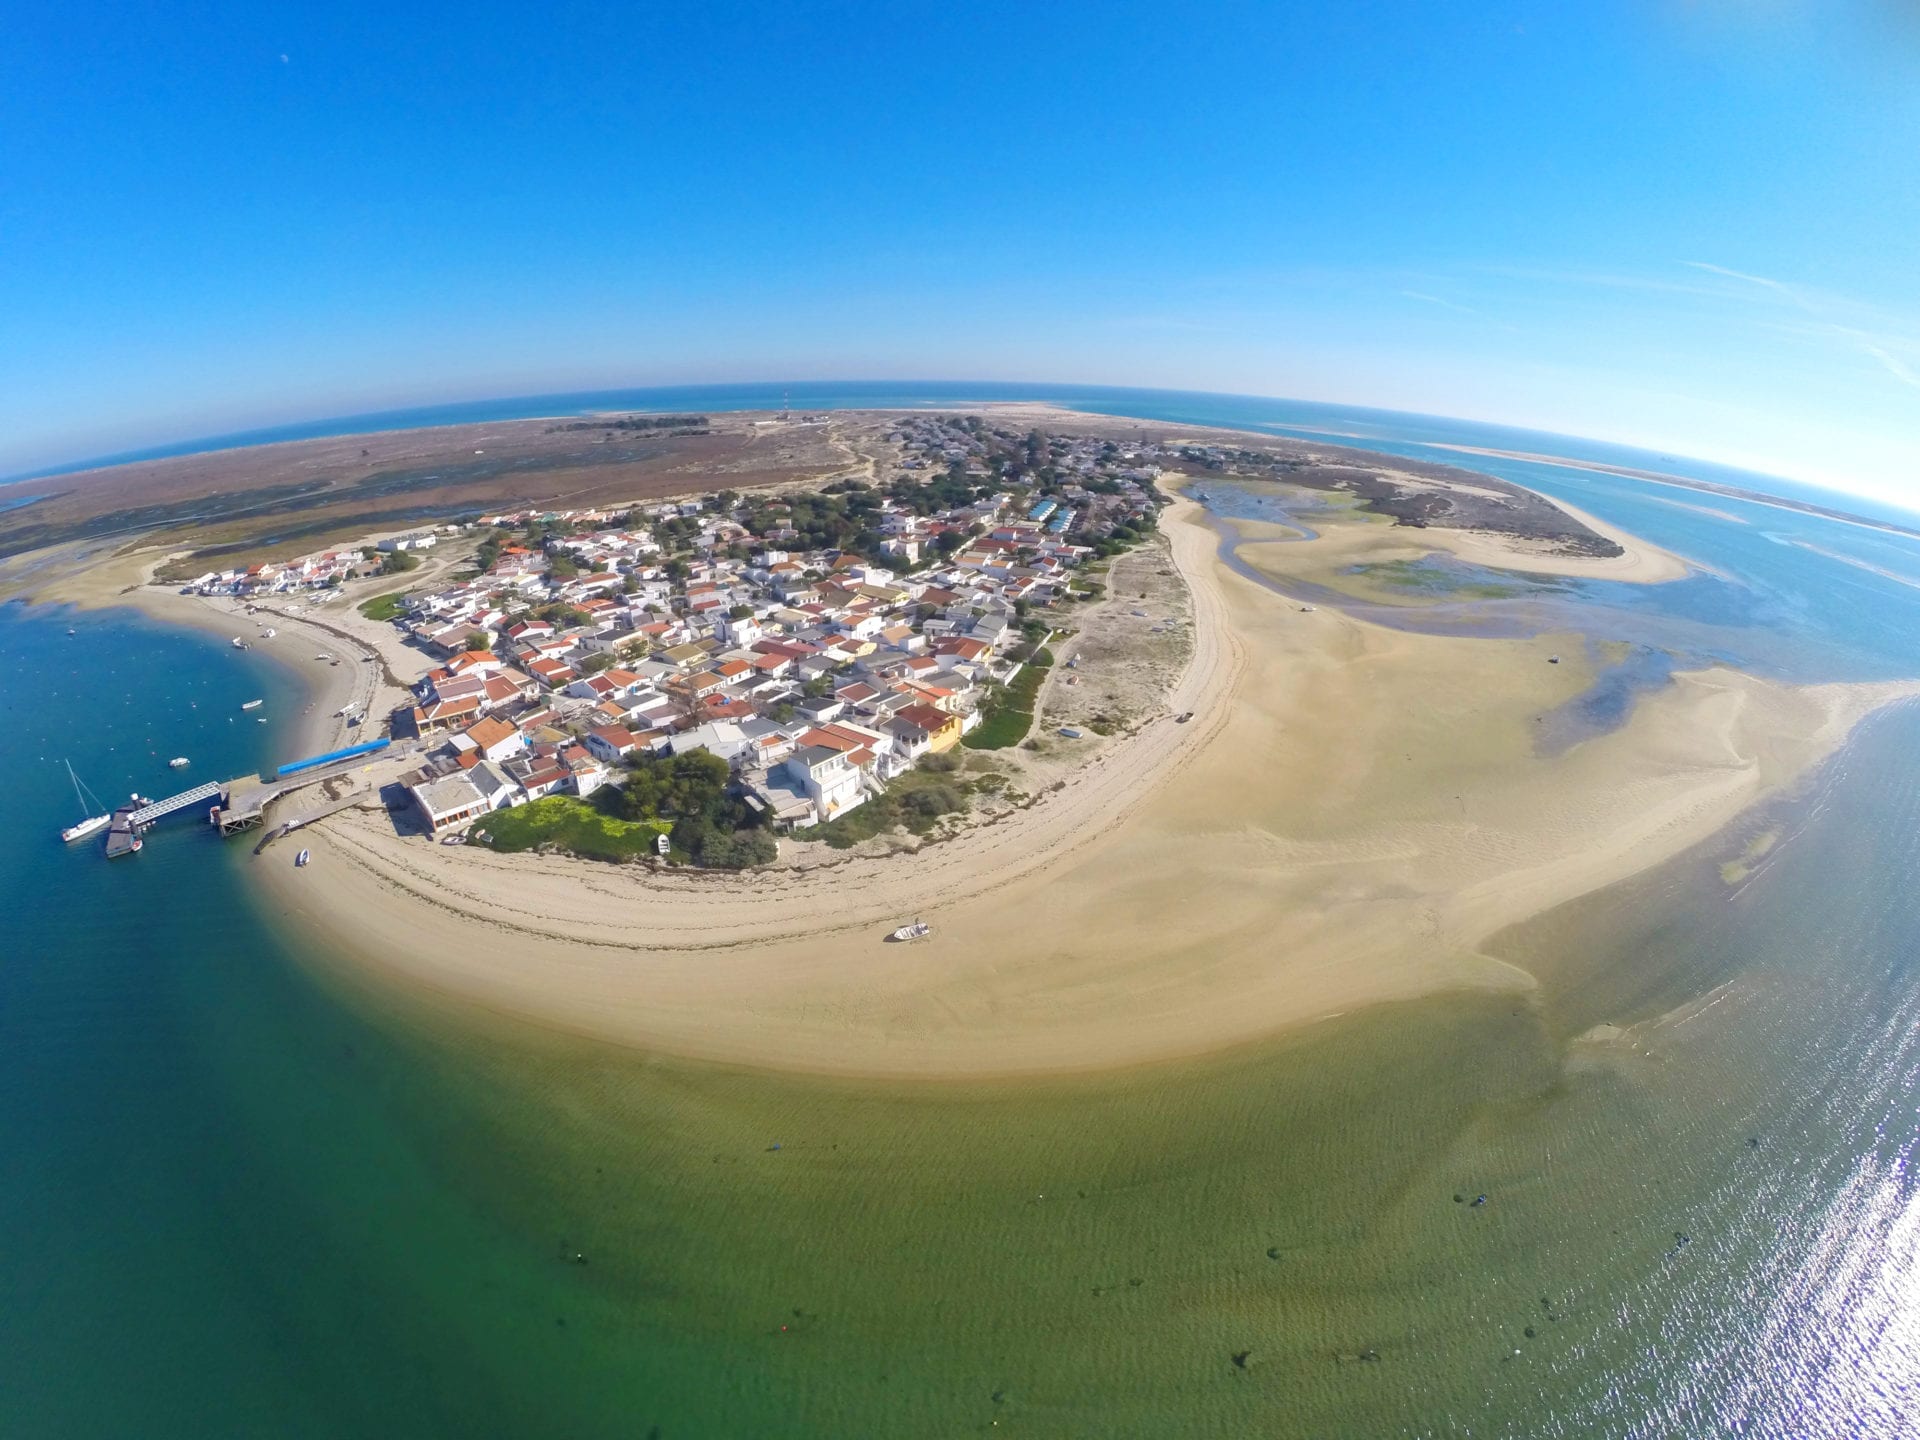 1 Hour Ria Formosa Boat Tour in Olhao